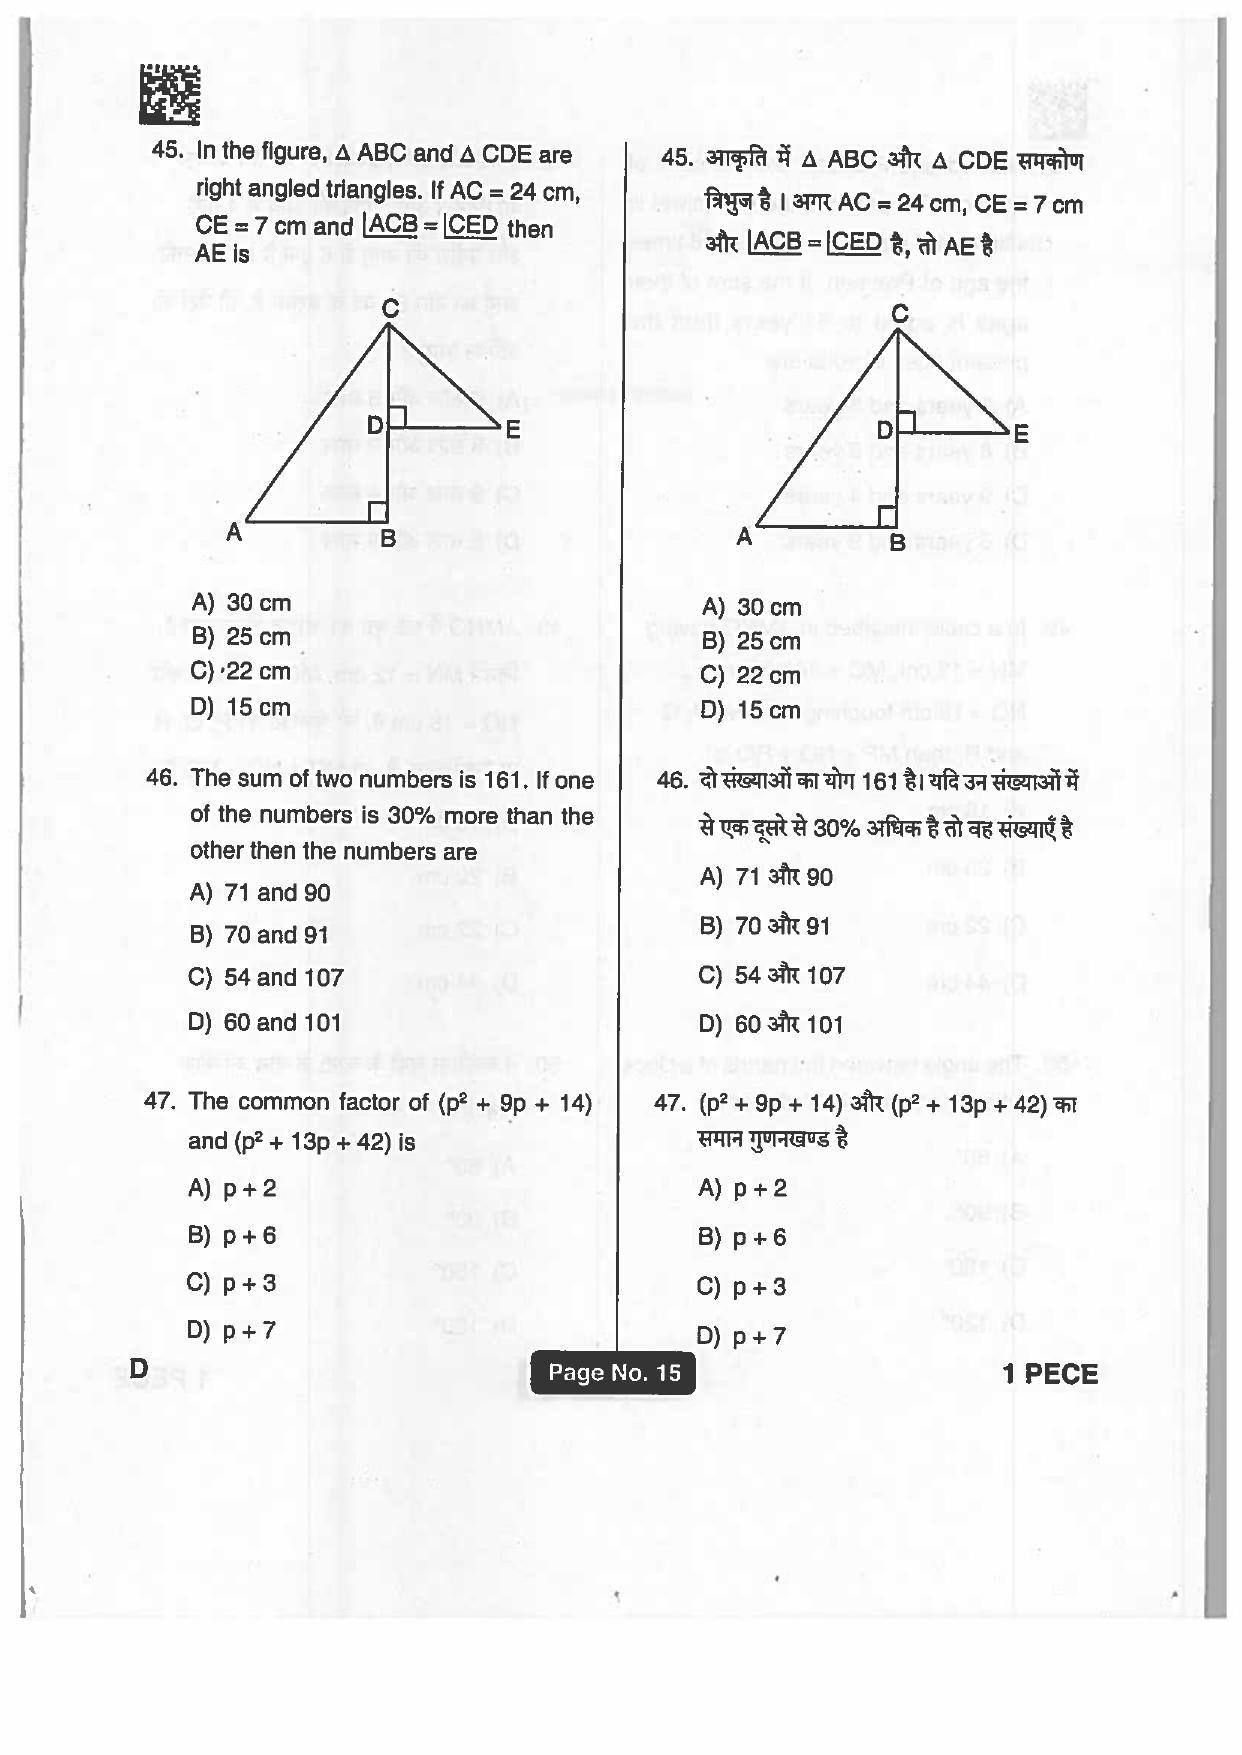 Jharkhand Polytechnic SET D 2019 Question Paper with Answers - Page 14